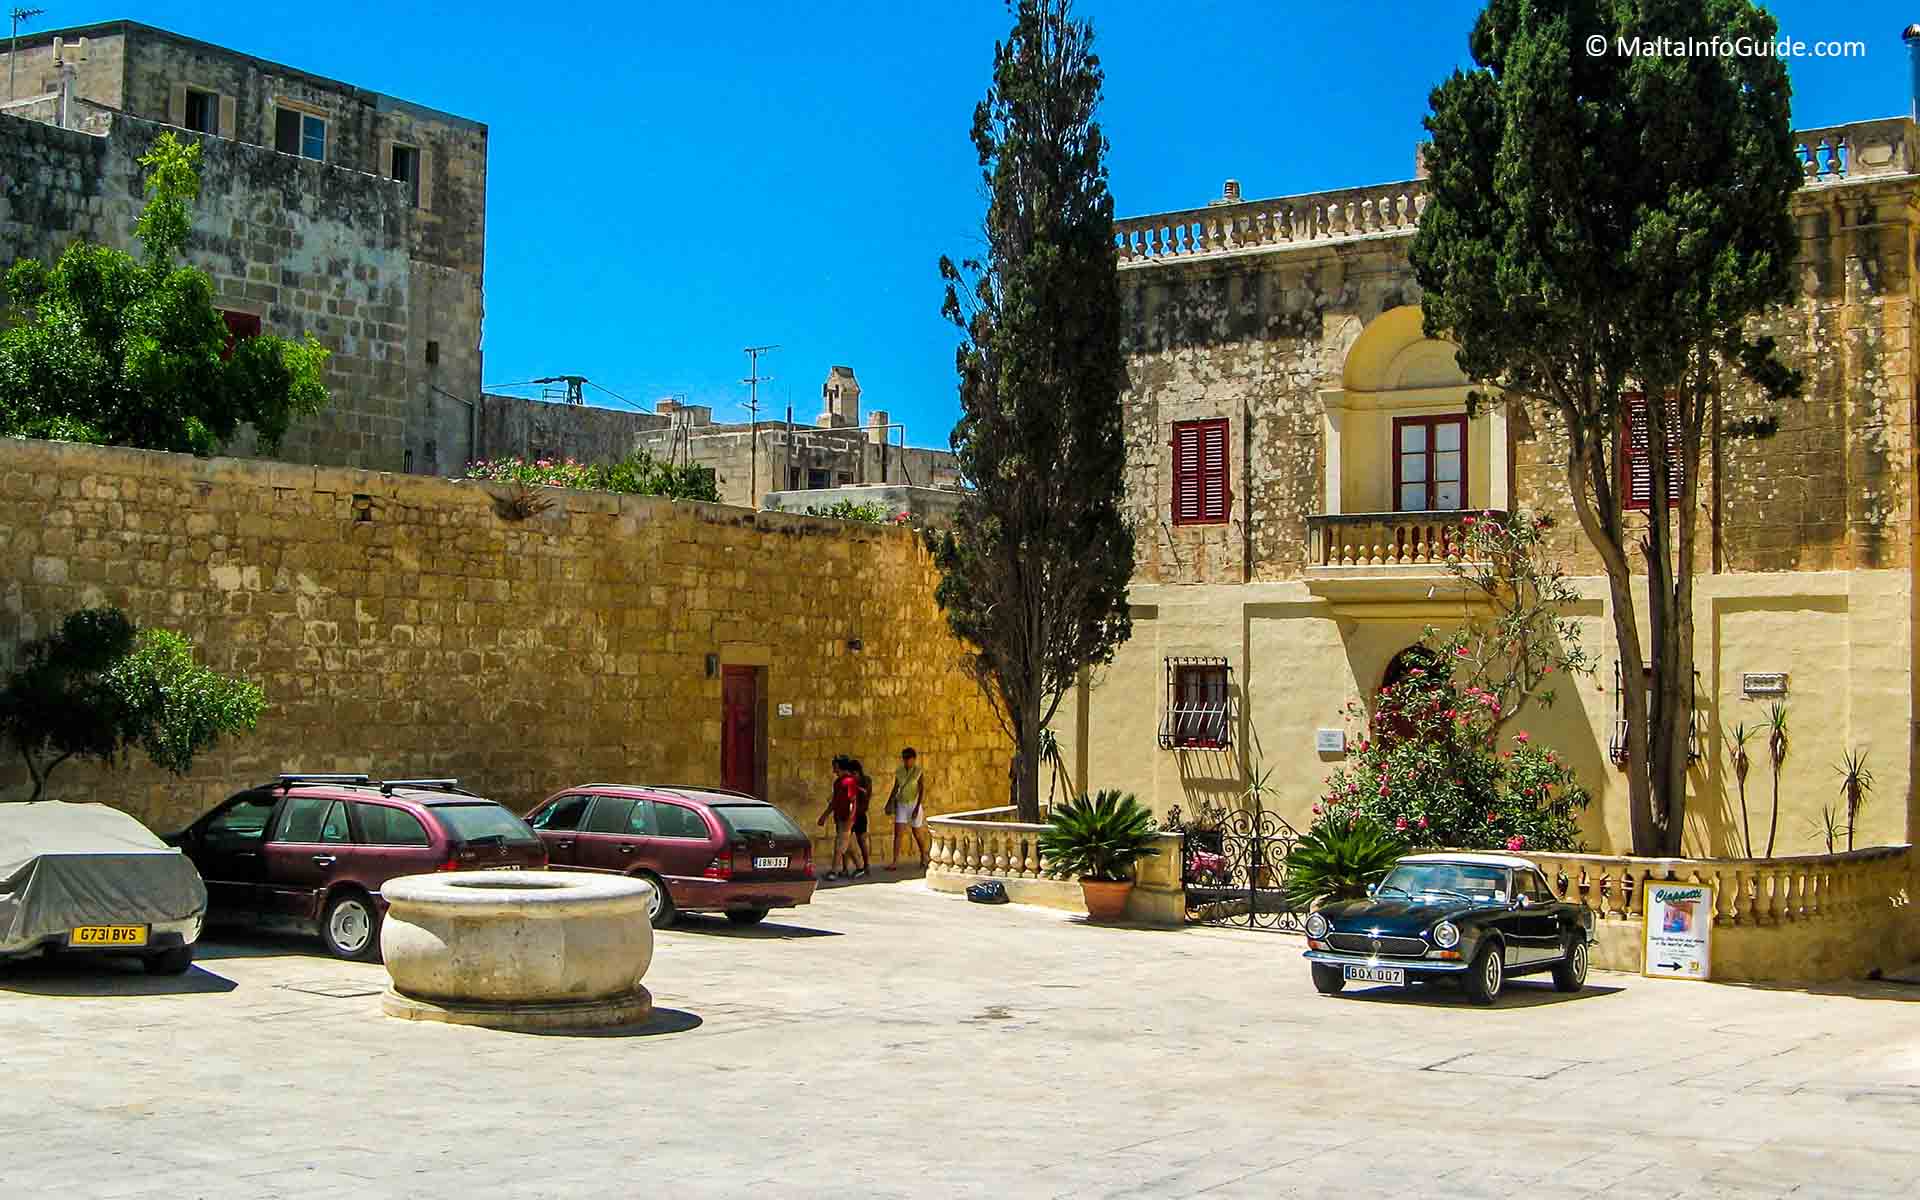 Cars parked in a small square in Mdina